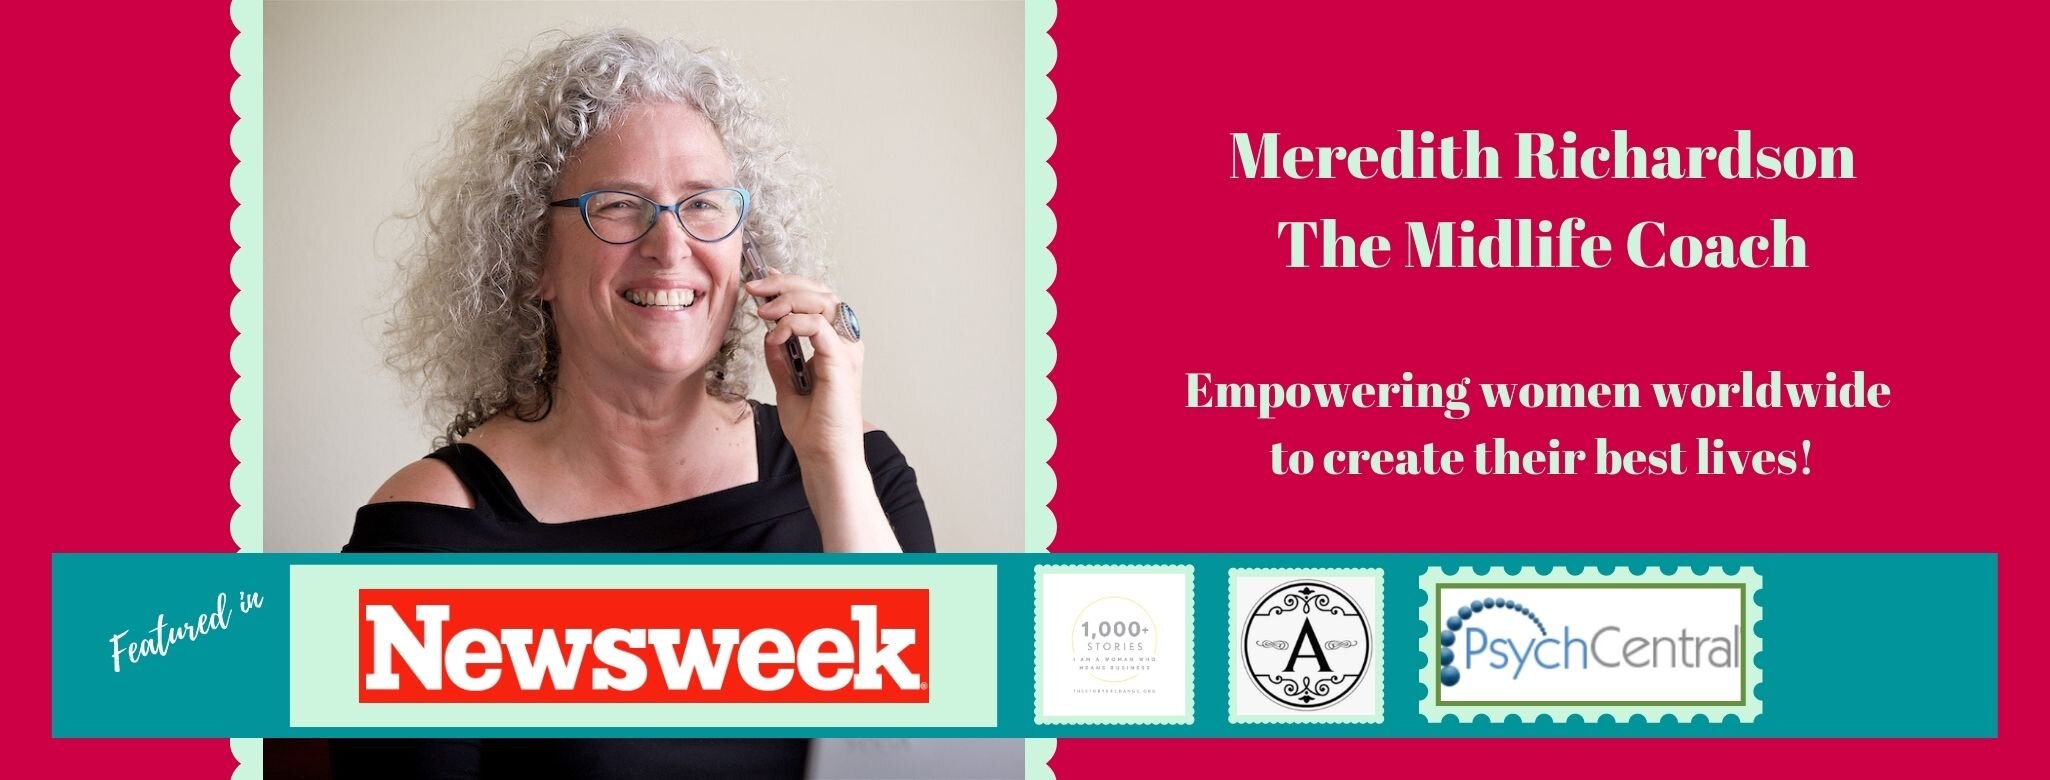 Meredith - The Midlife Coach